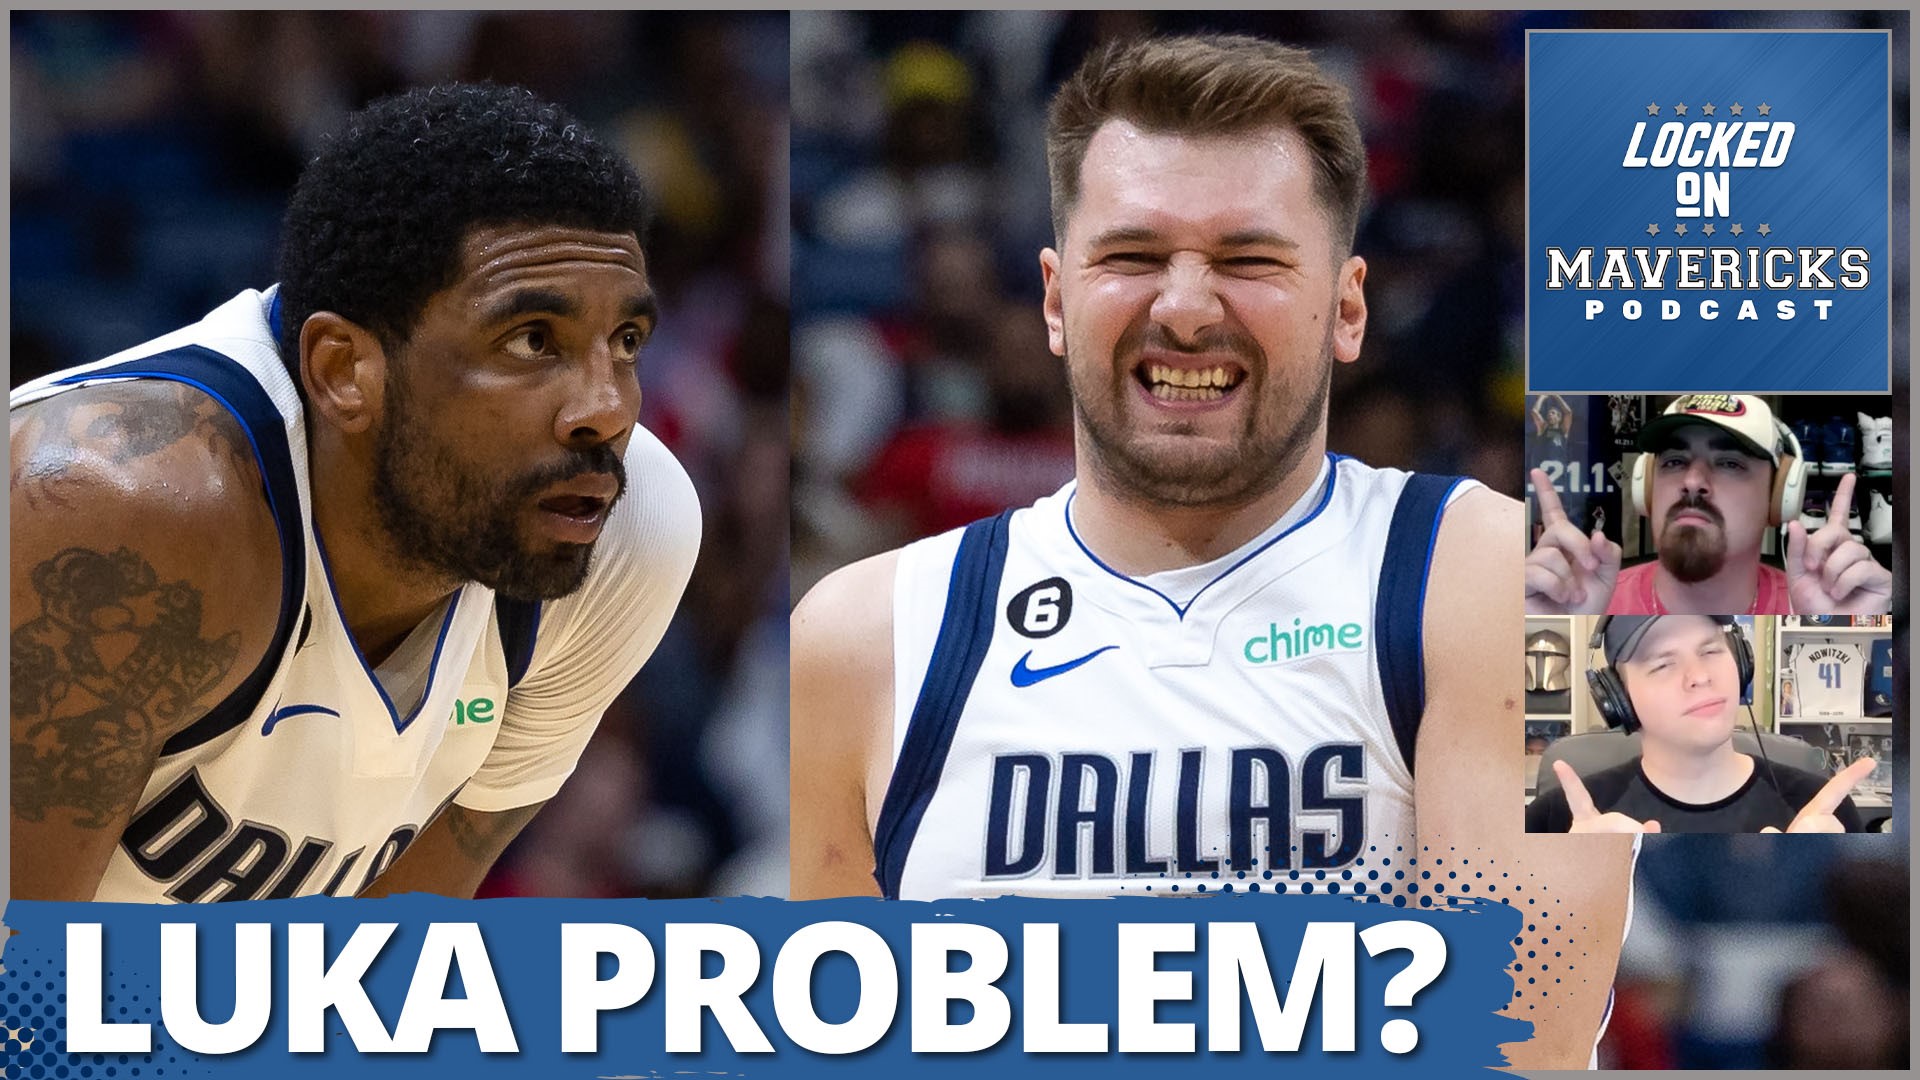 Nick Angstadt & Isaac Harris share the injury update for Luka Doncic and what they expect from Kyrie and the Mavs in his absence.